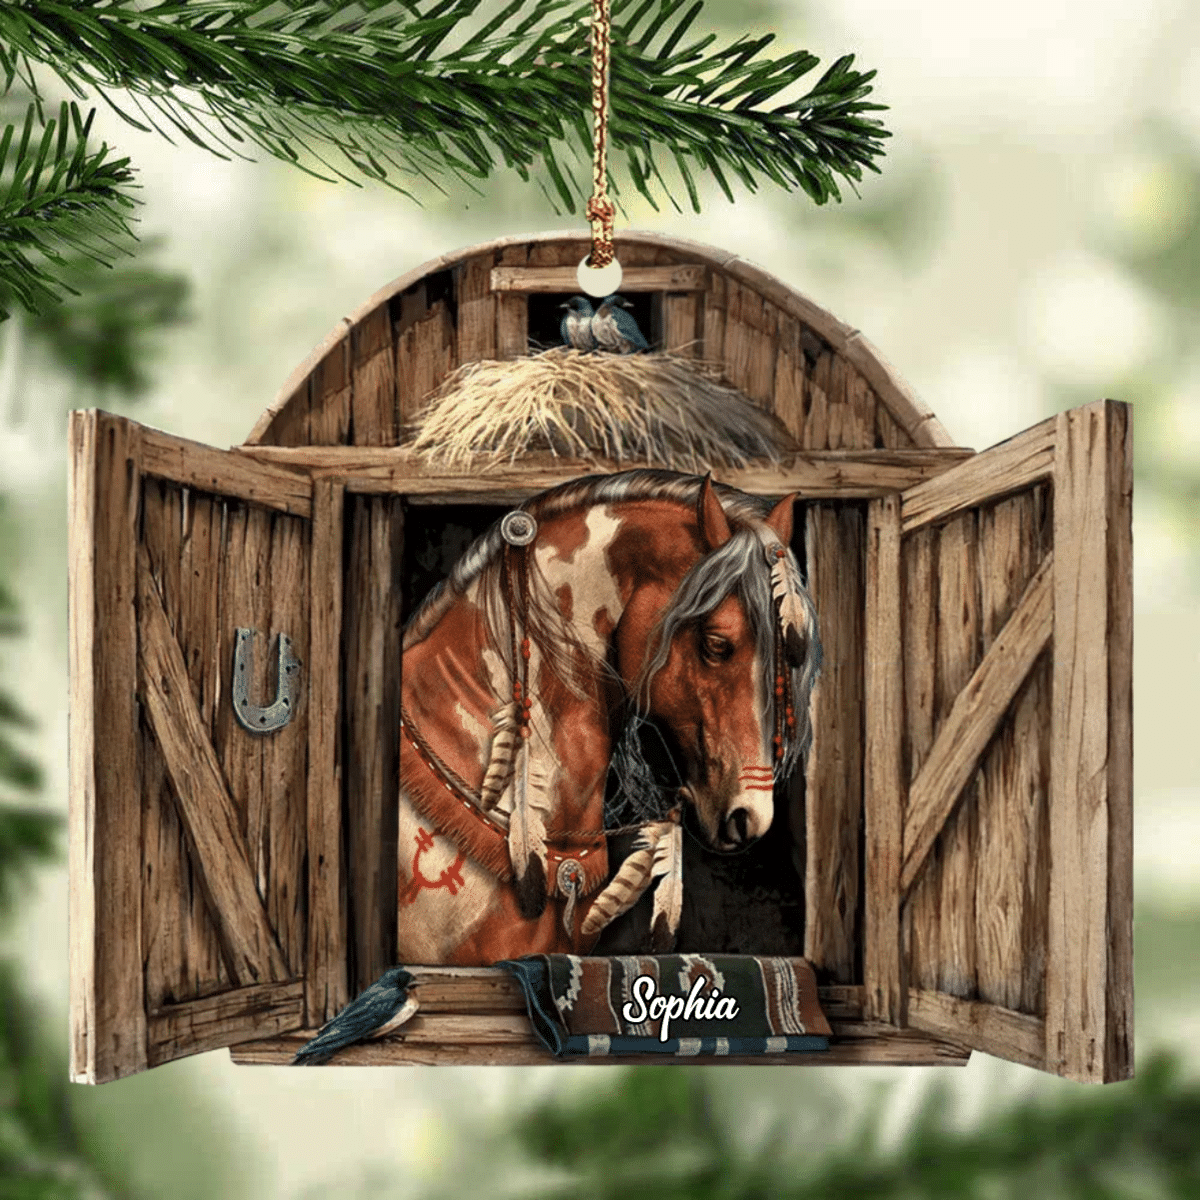 Personalized Horse Ornament/ Country Horses On Farm/ Horse Breeds Custom Name for Horse Lovers